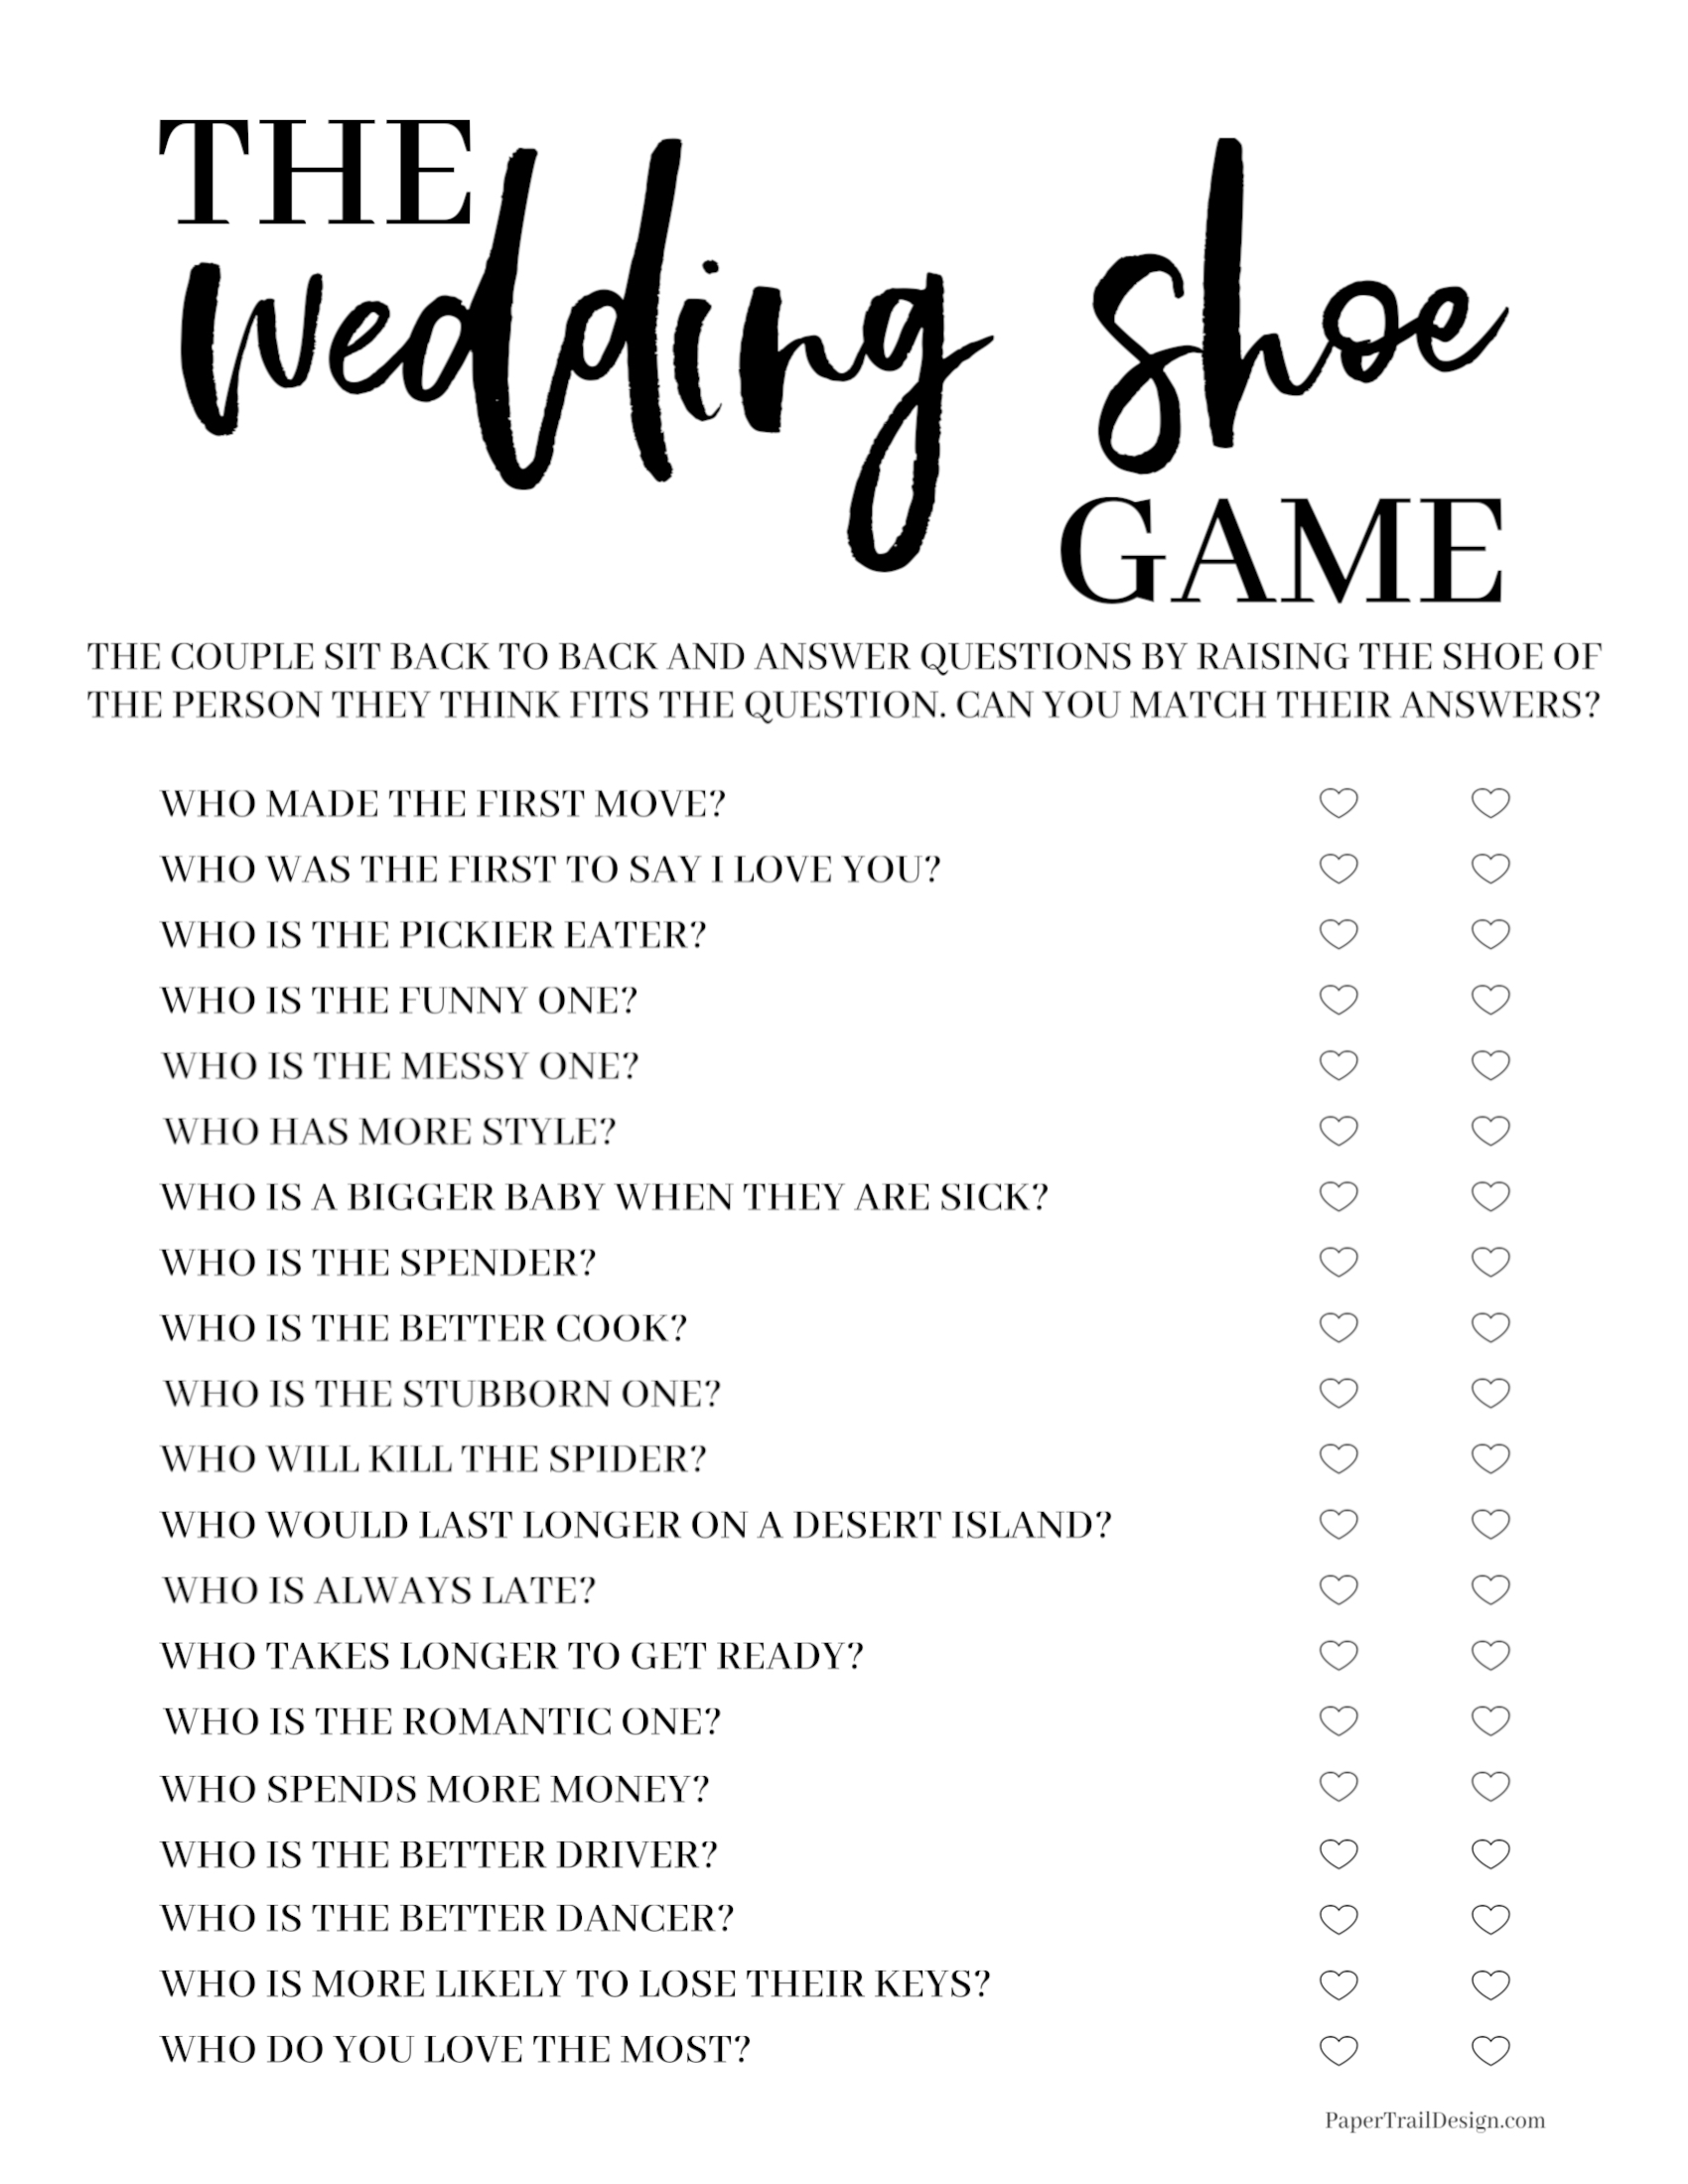 The Wedding Shoe Game Free Printable | Paper Trail Design